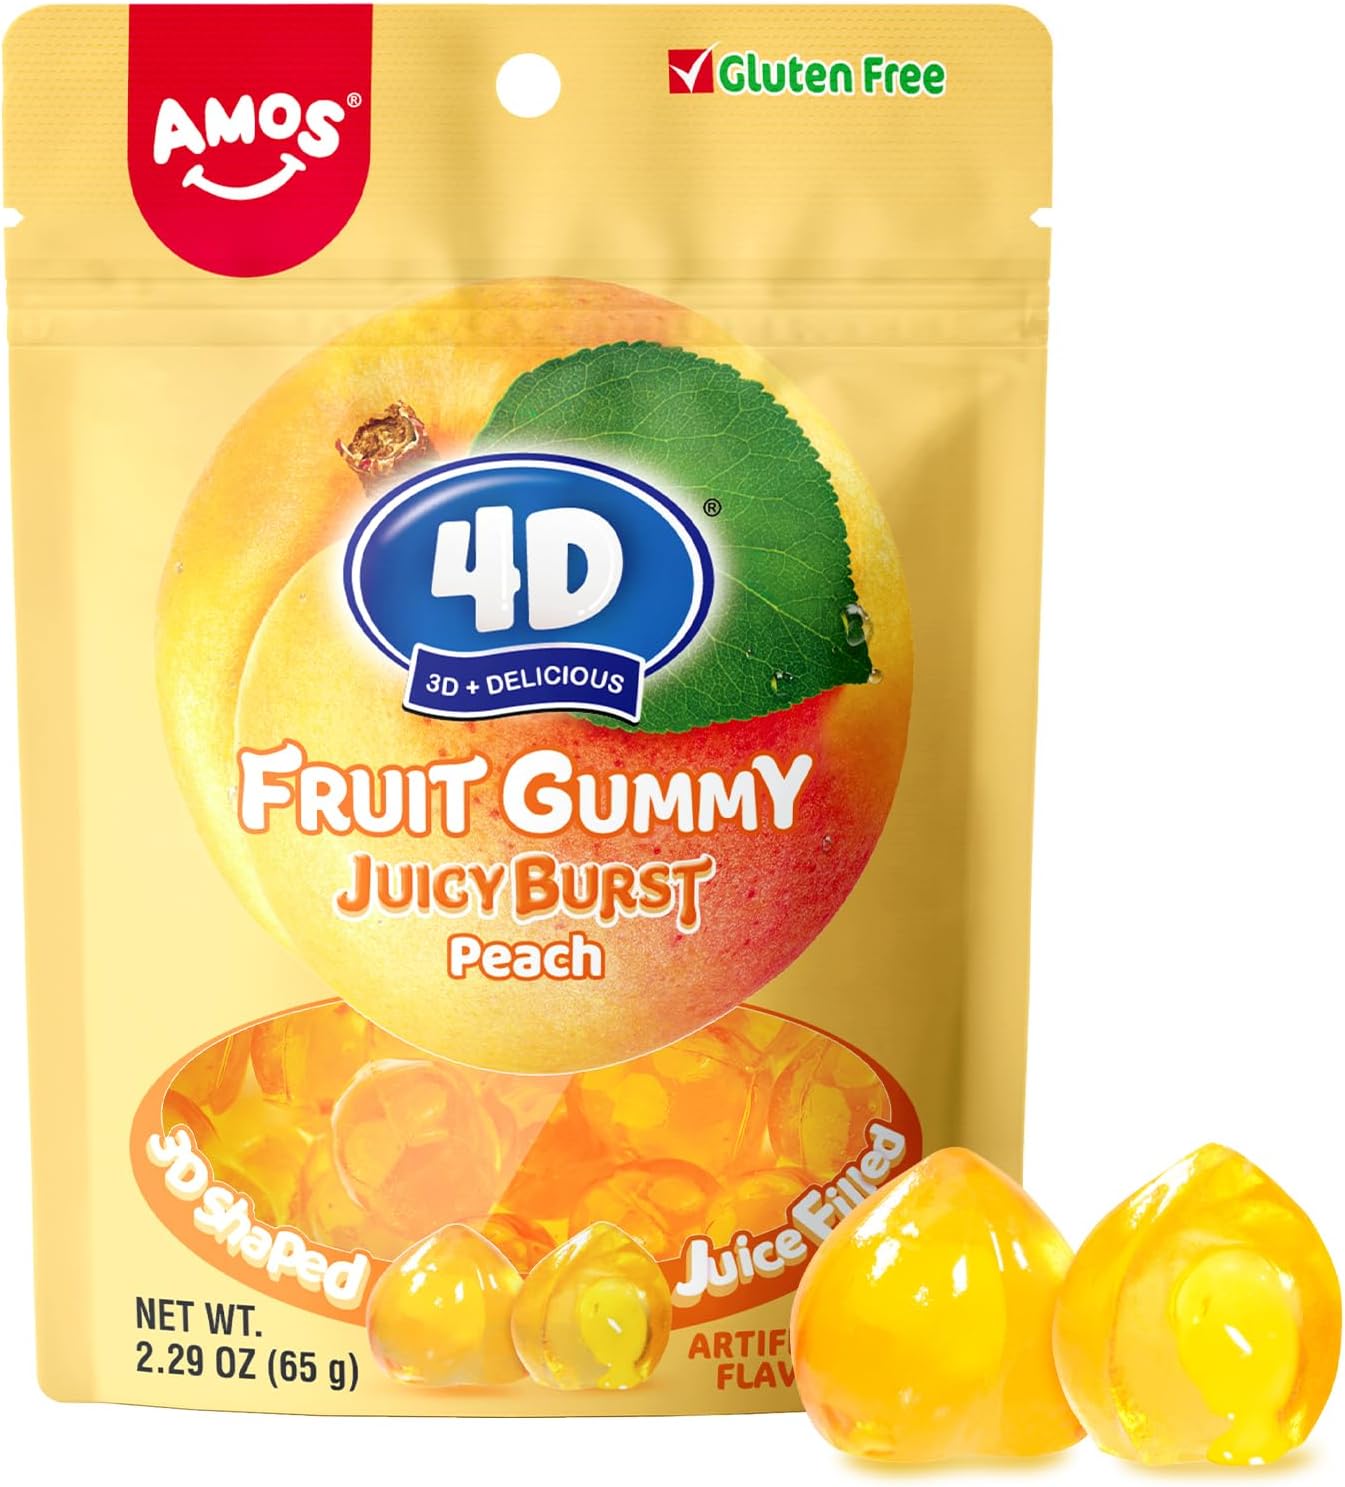 Amos 4D Gummy Candy Juice Burst, Yellow Peach Flavor Gluten Free Snacks, Resealable 2.29Oz Pack, Pack Of 12